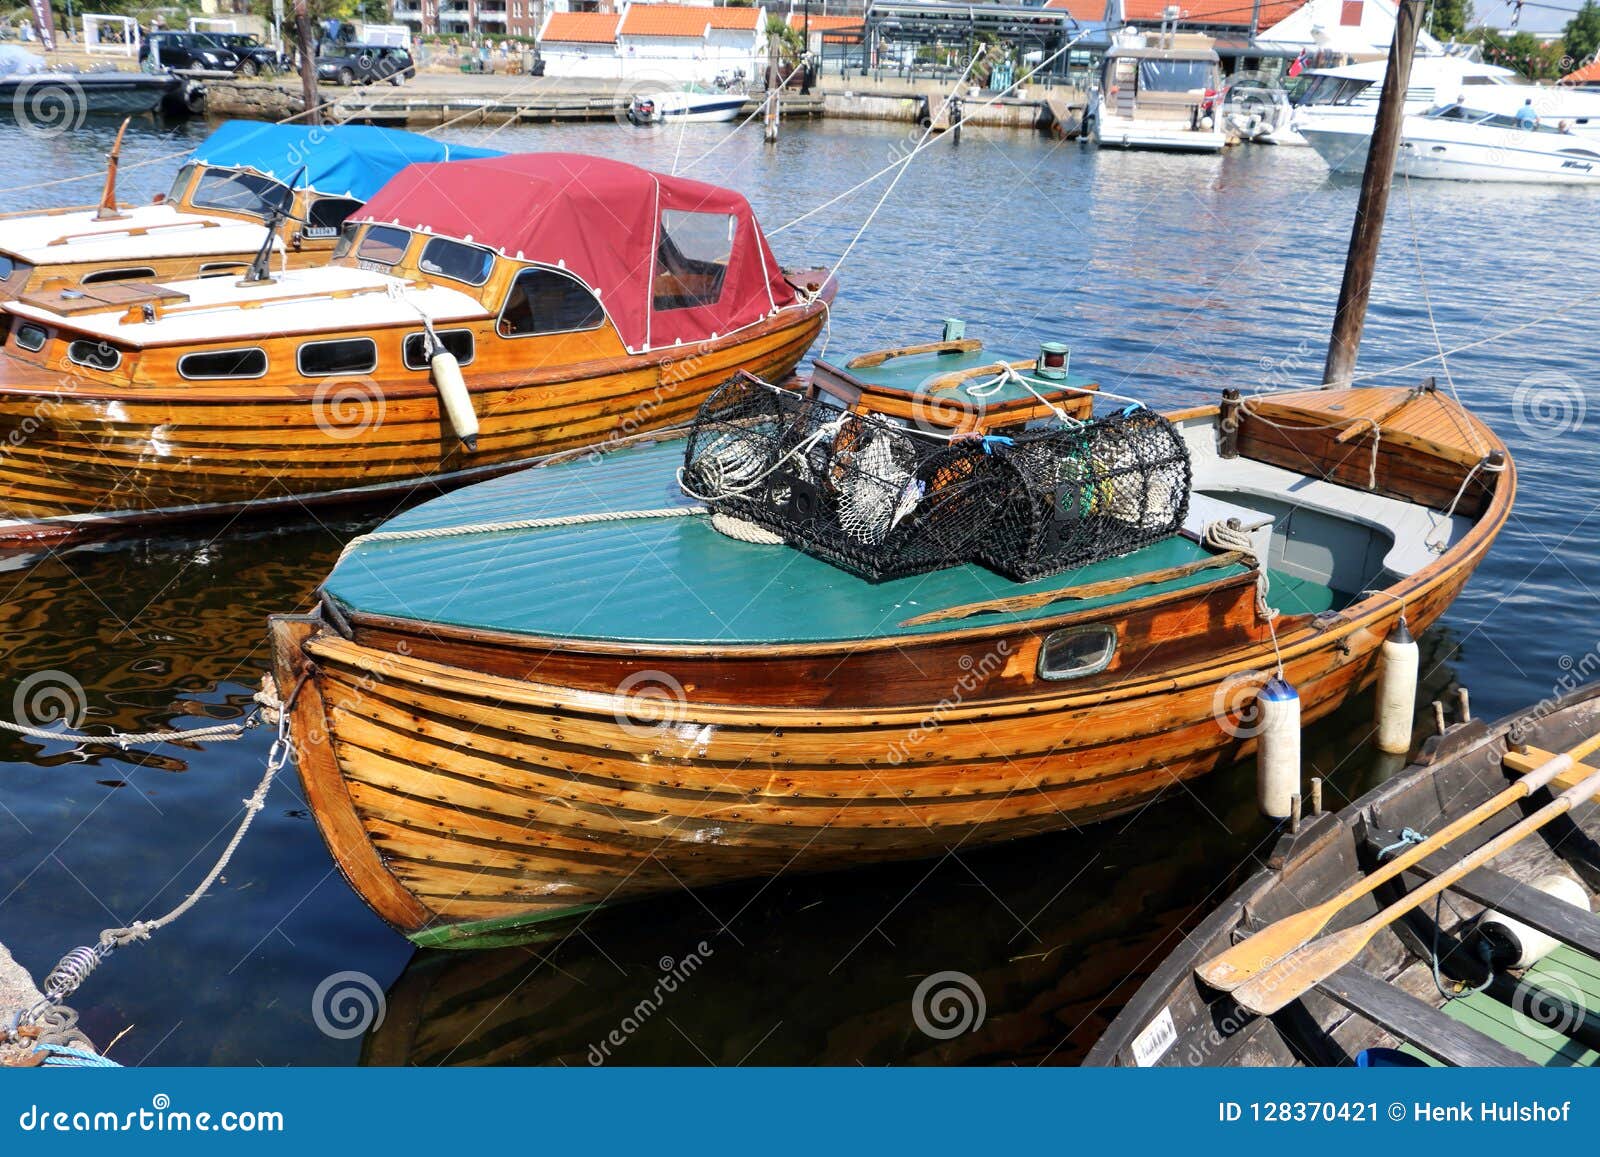 wooden boats in harbor kristiansand norway stock image